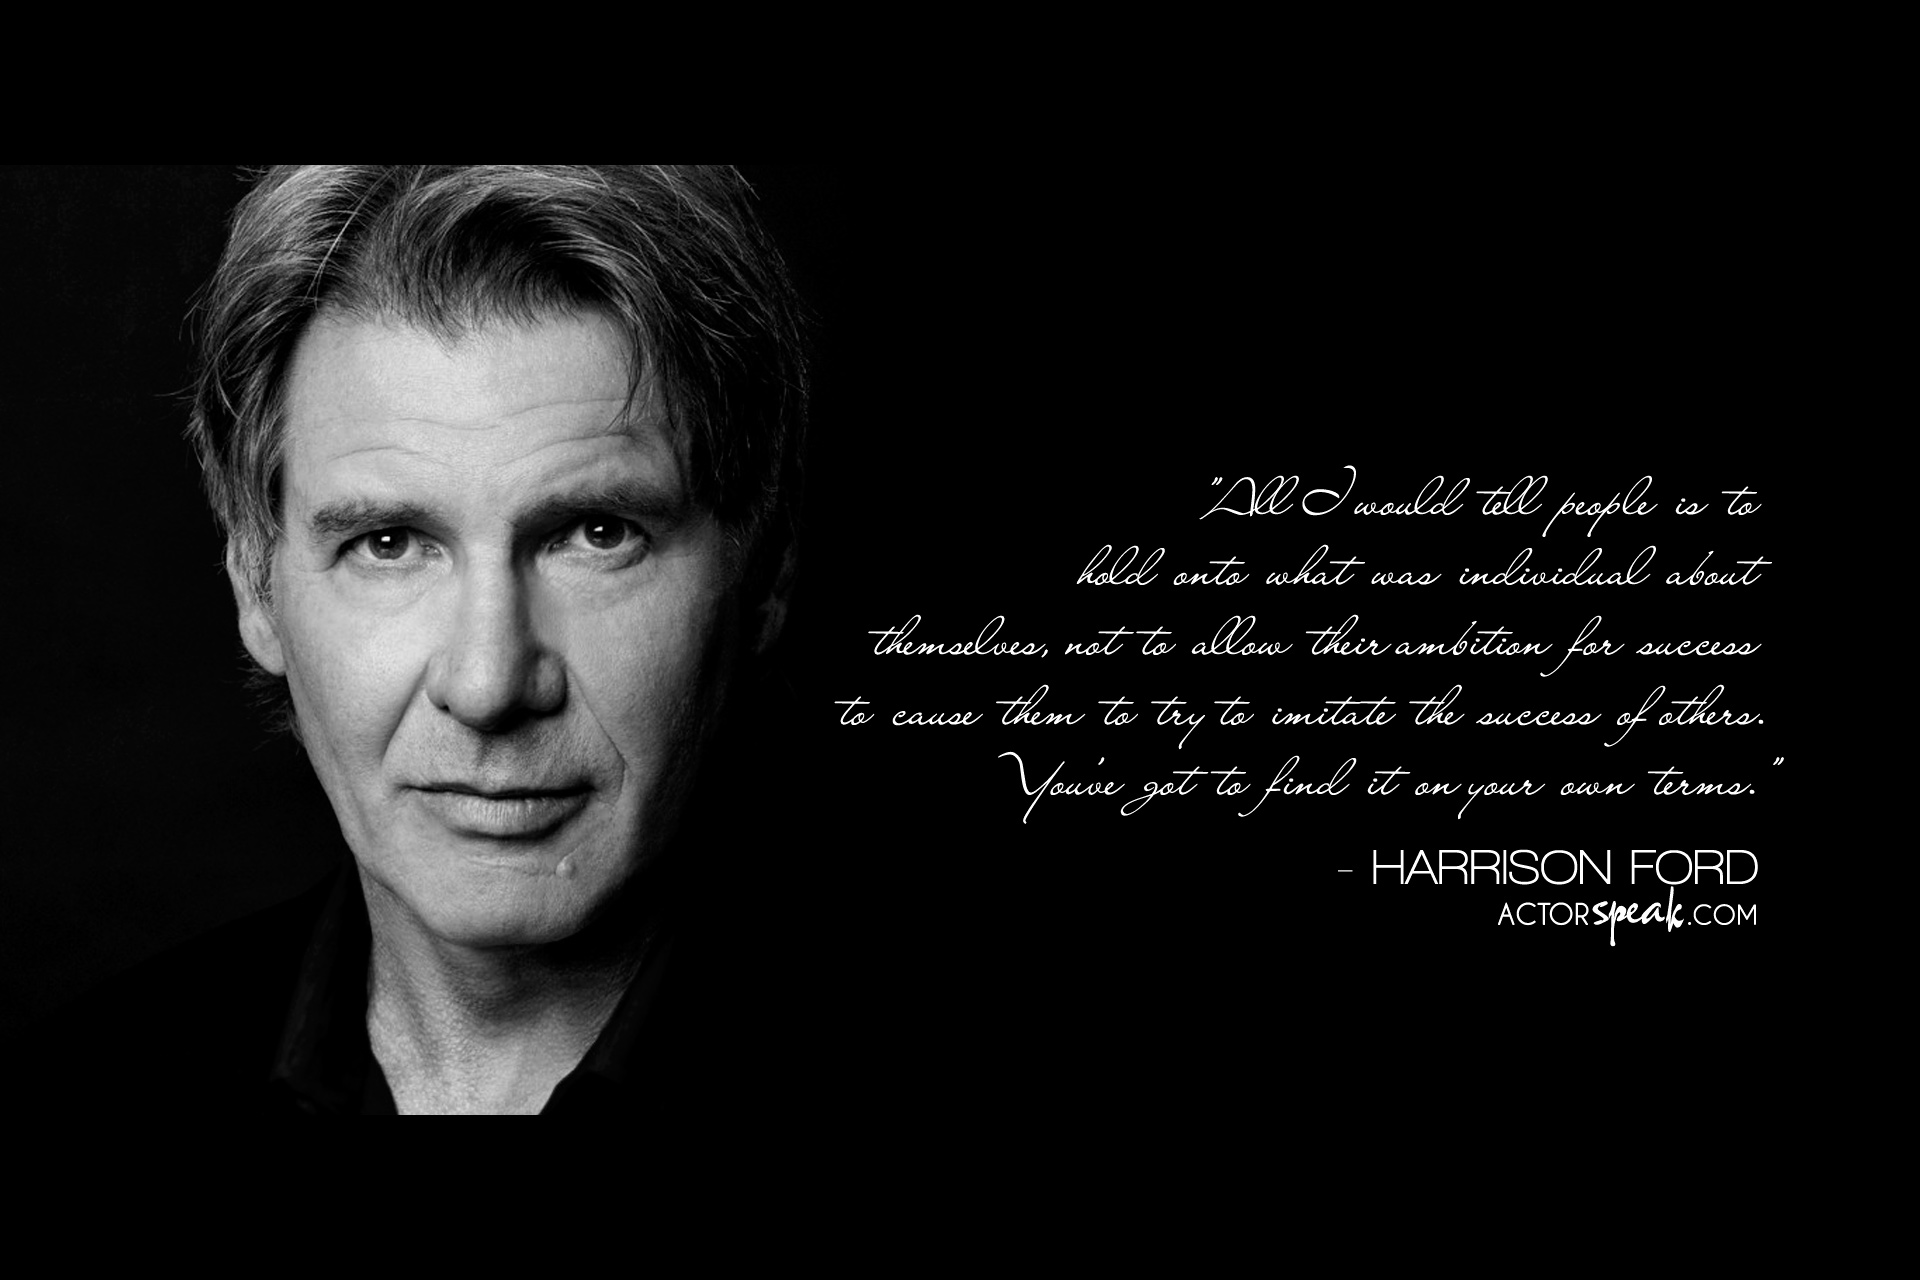 WALLPAPER: Harrison Ford quote on acting with photo | ActorSpeak.com